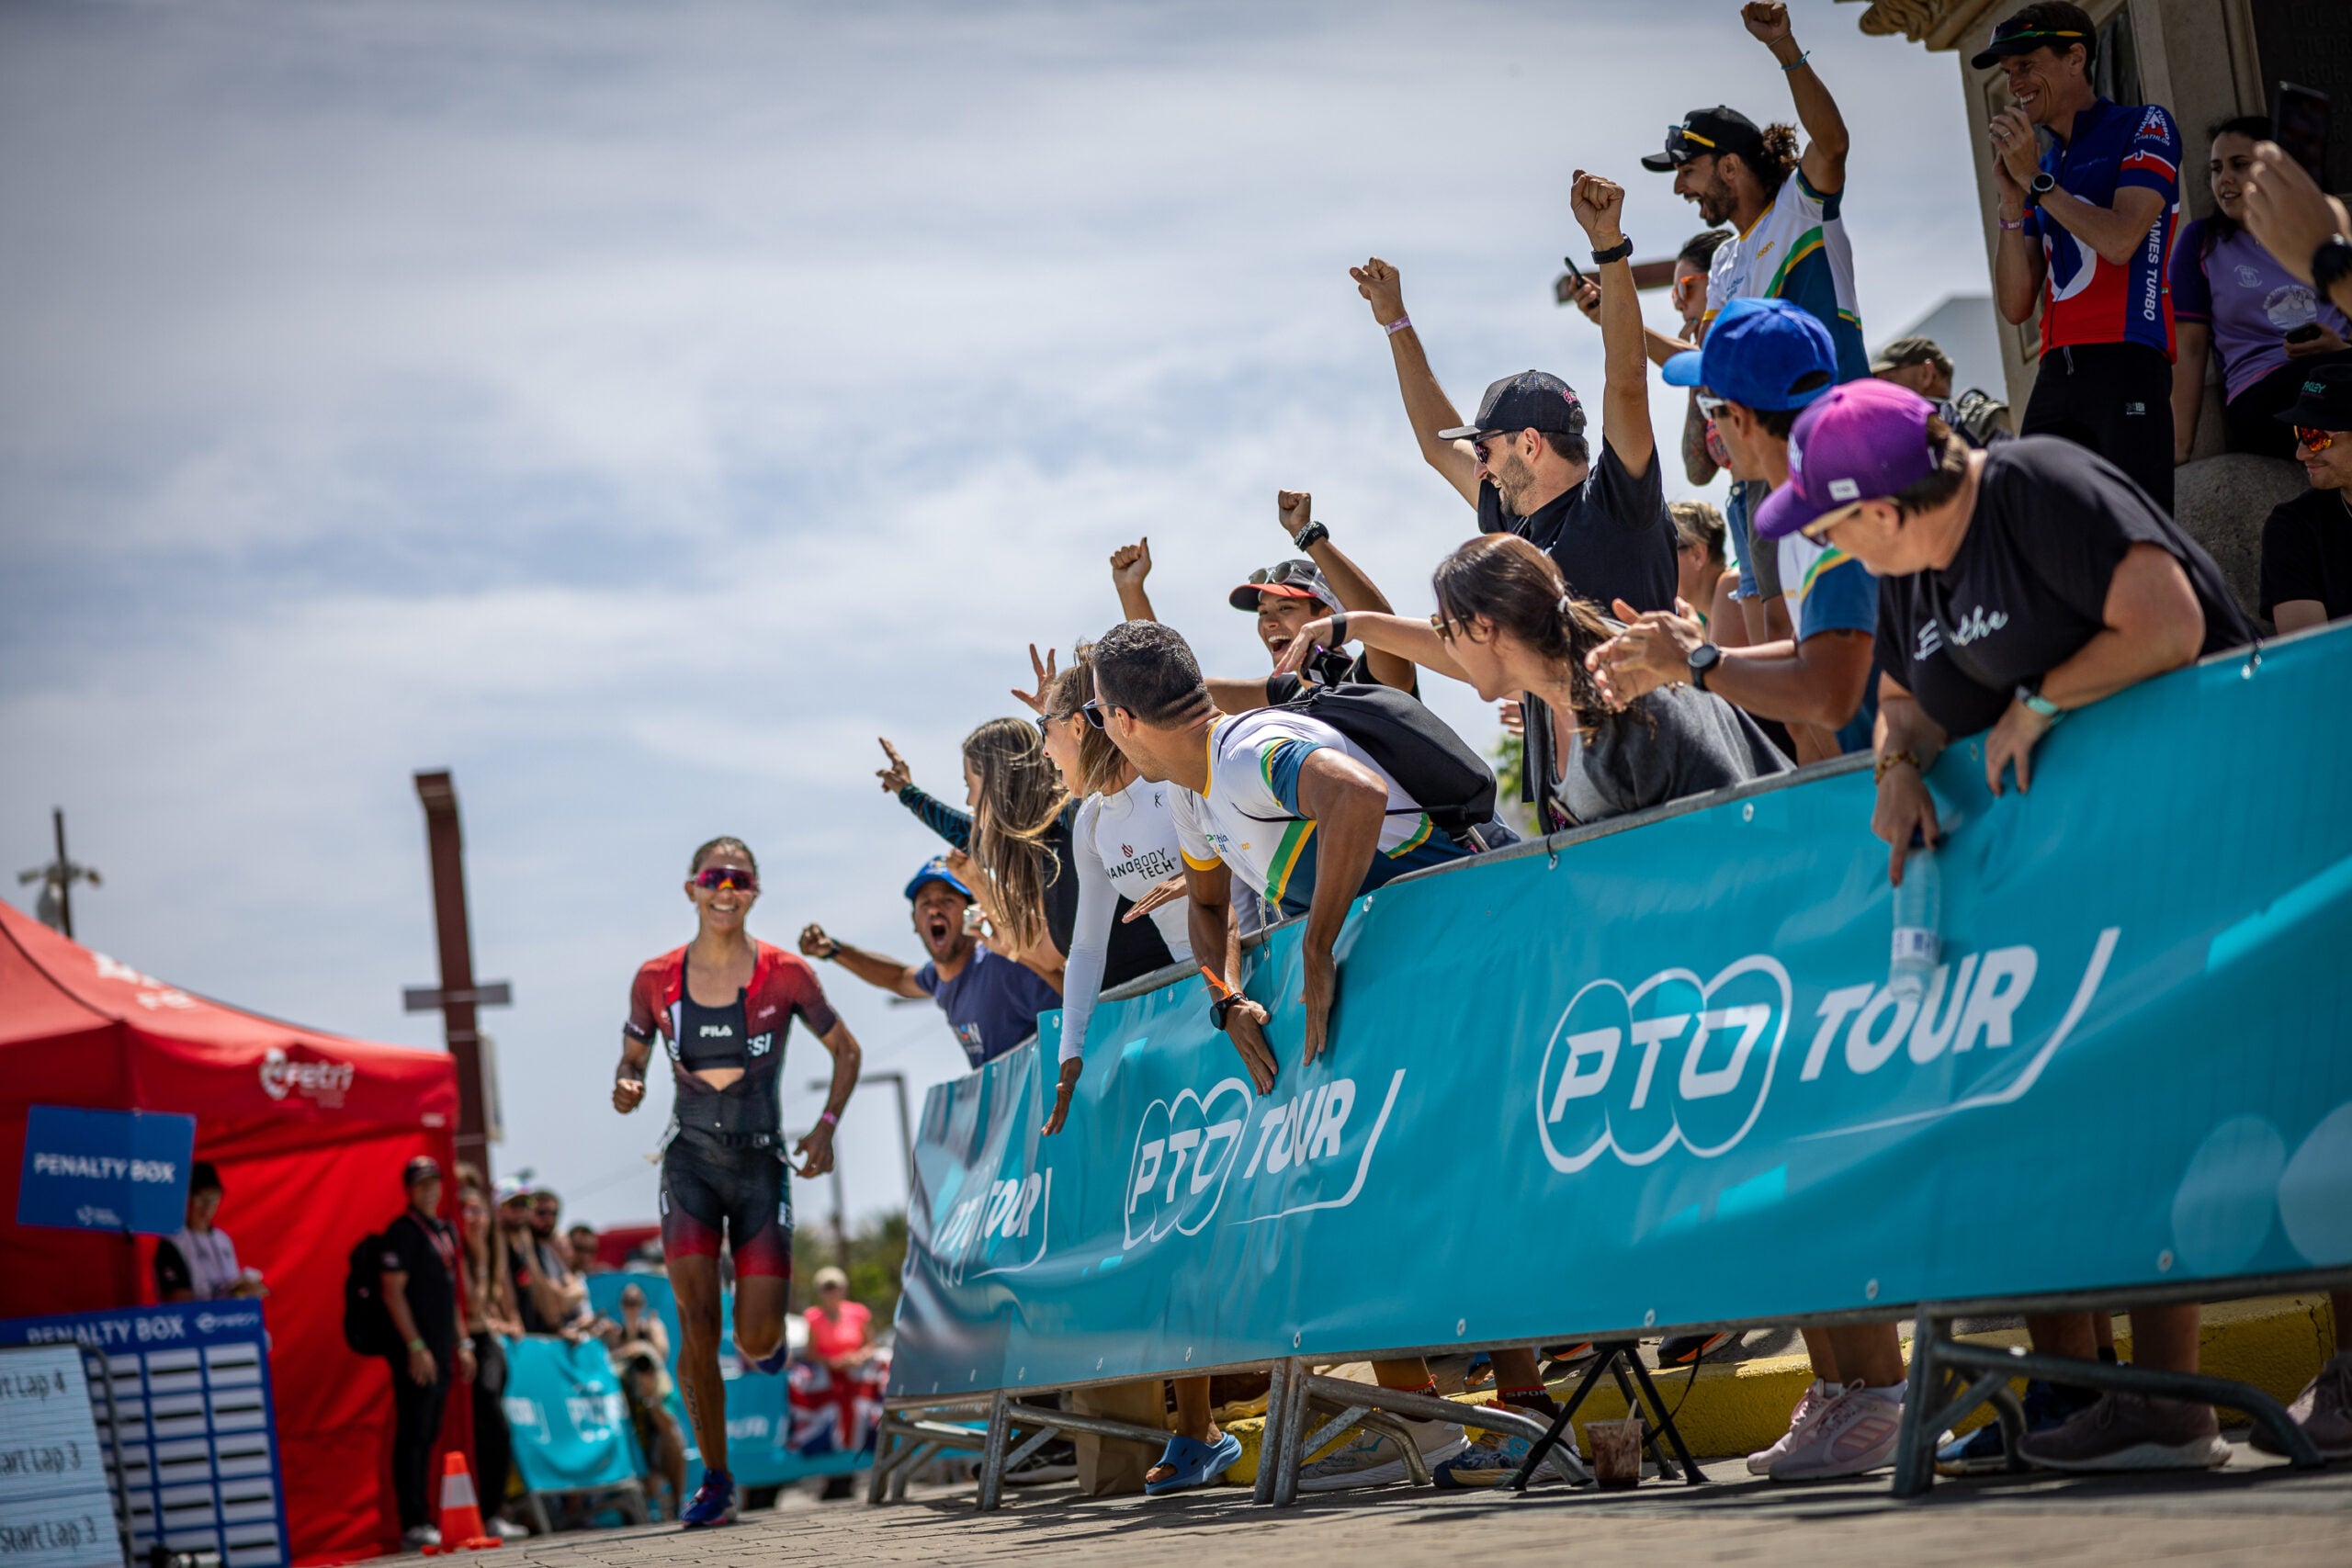 Spectators cheer on the pros at the inaugural PTO European Open in Ibiza, Spain.